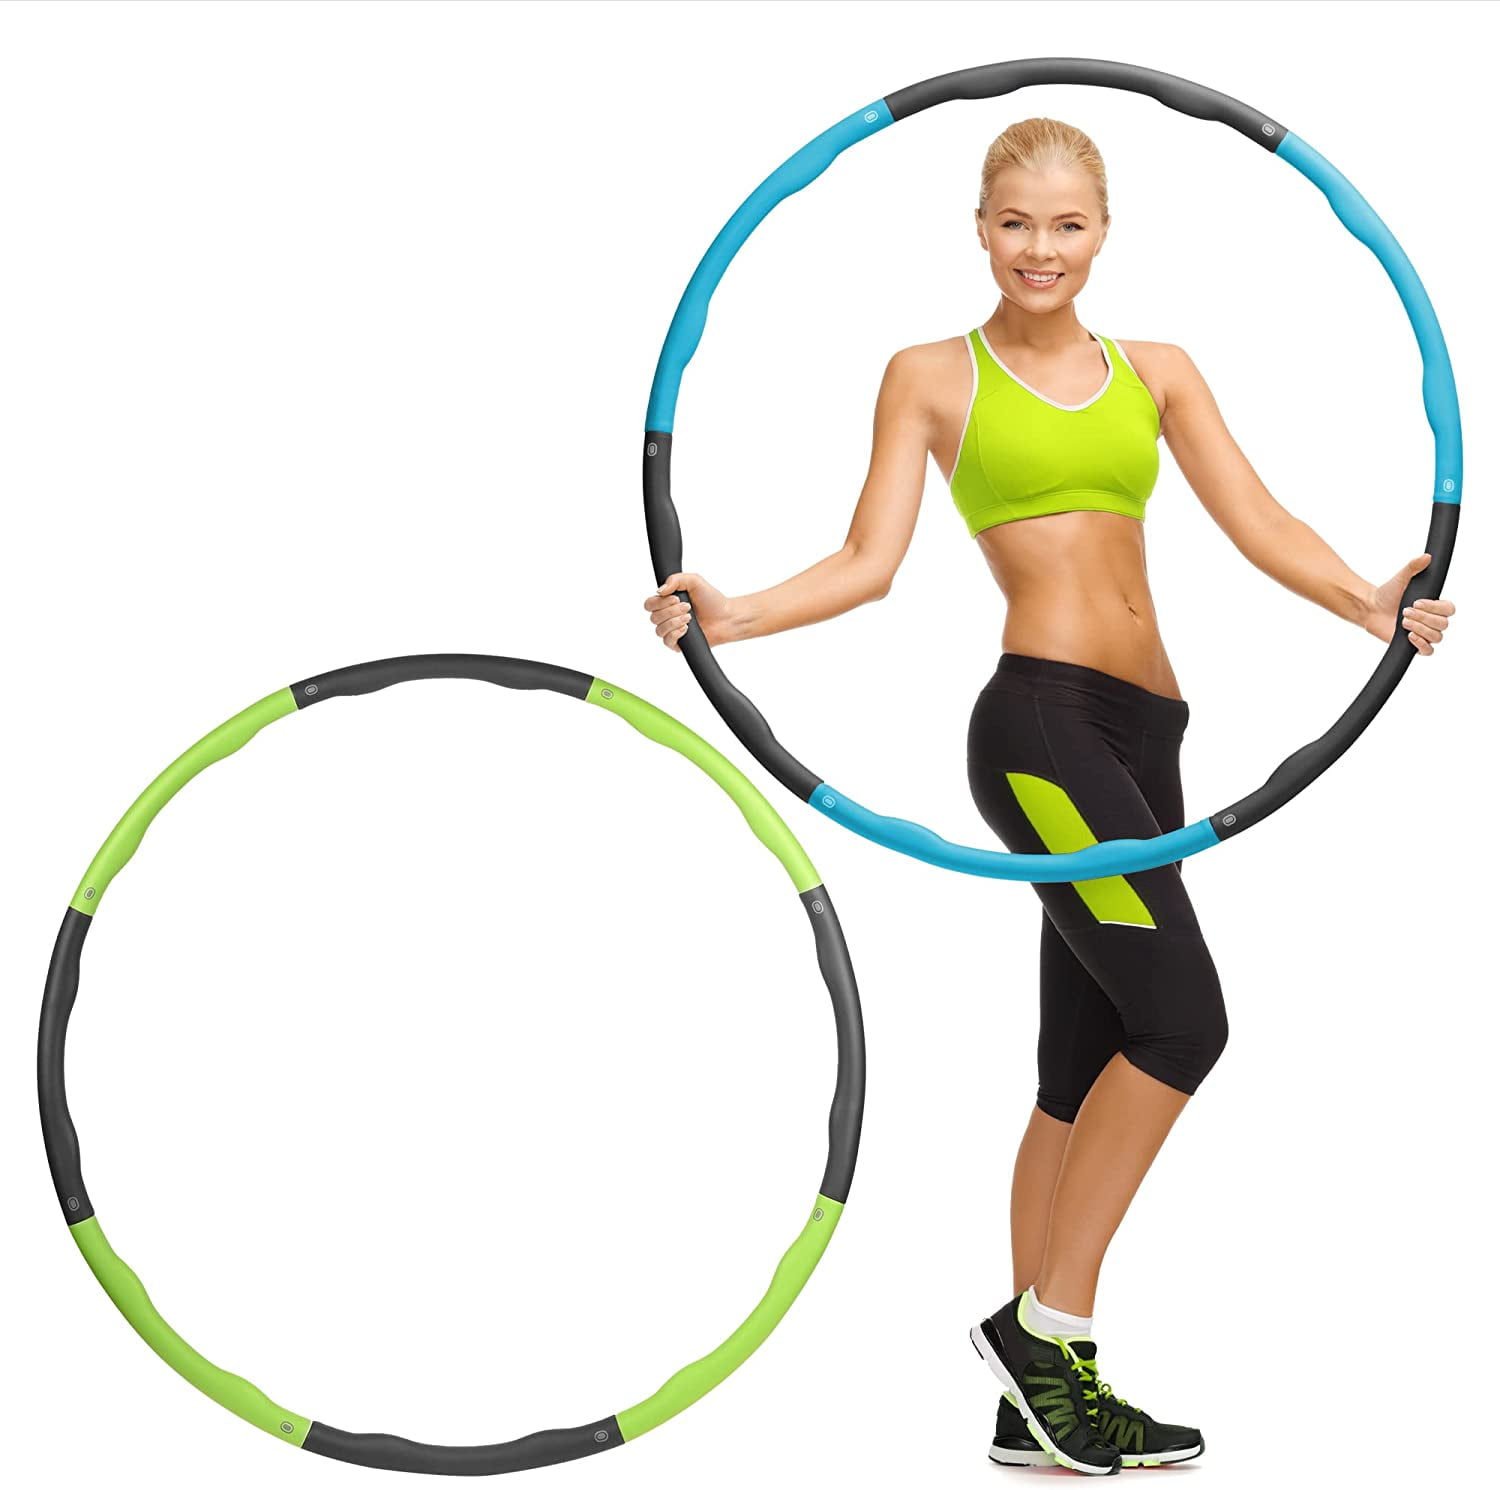 Weighted Hoops